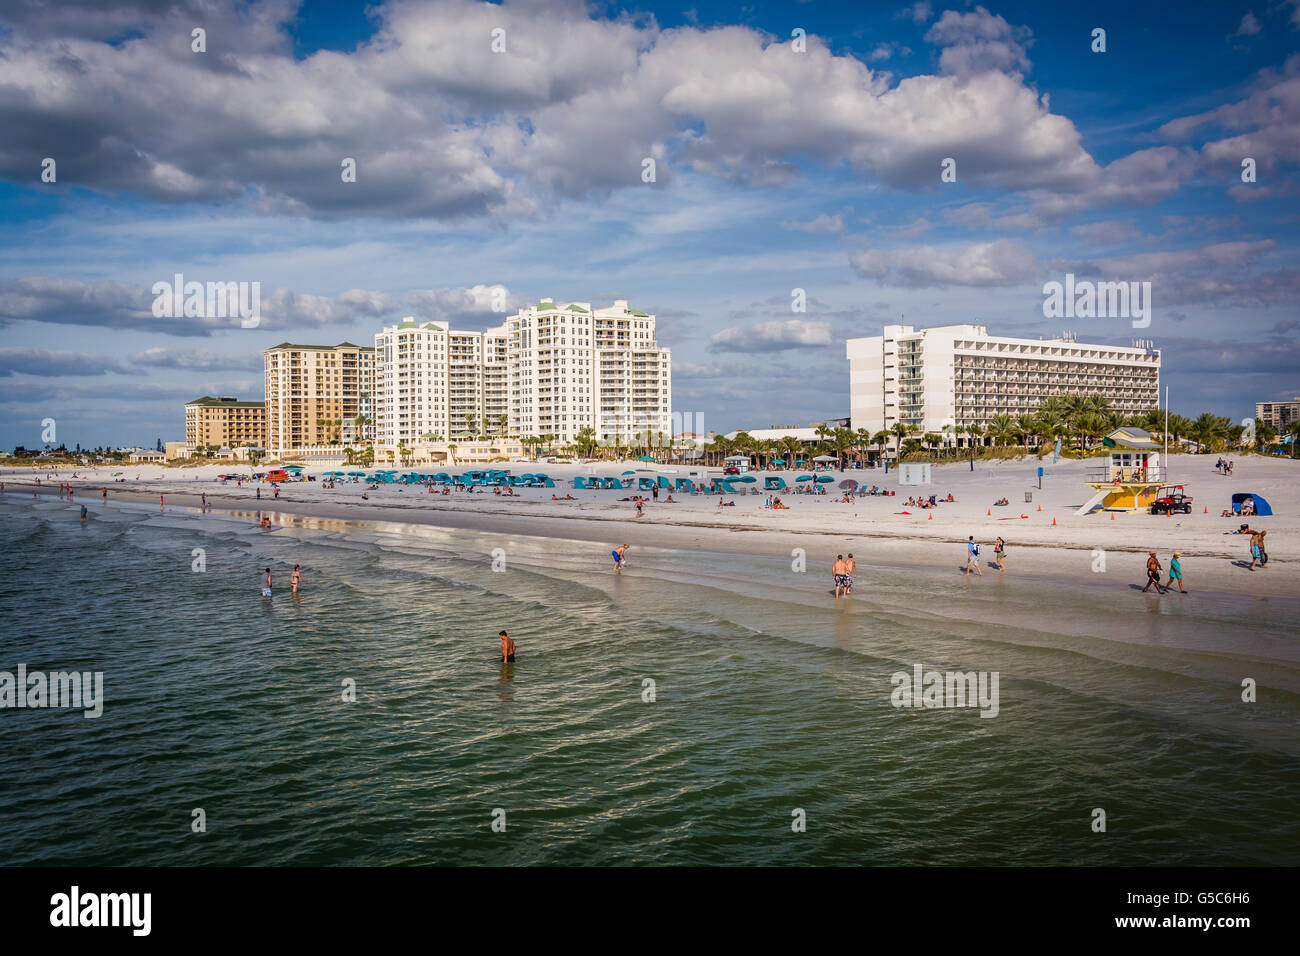 View of beachfront hotels and the beach from the fishing pier in Clearwater Beach, Florida. Stock Photo